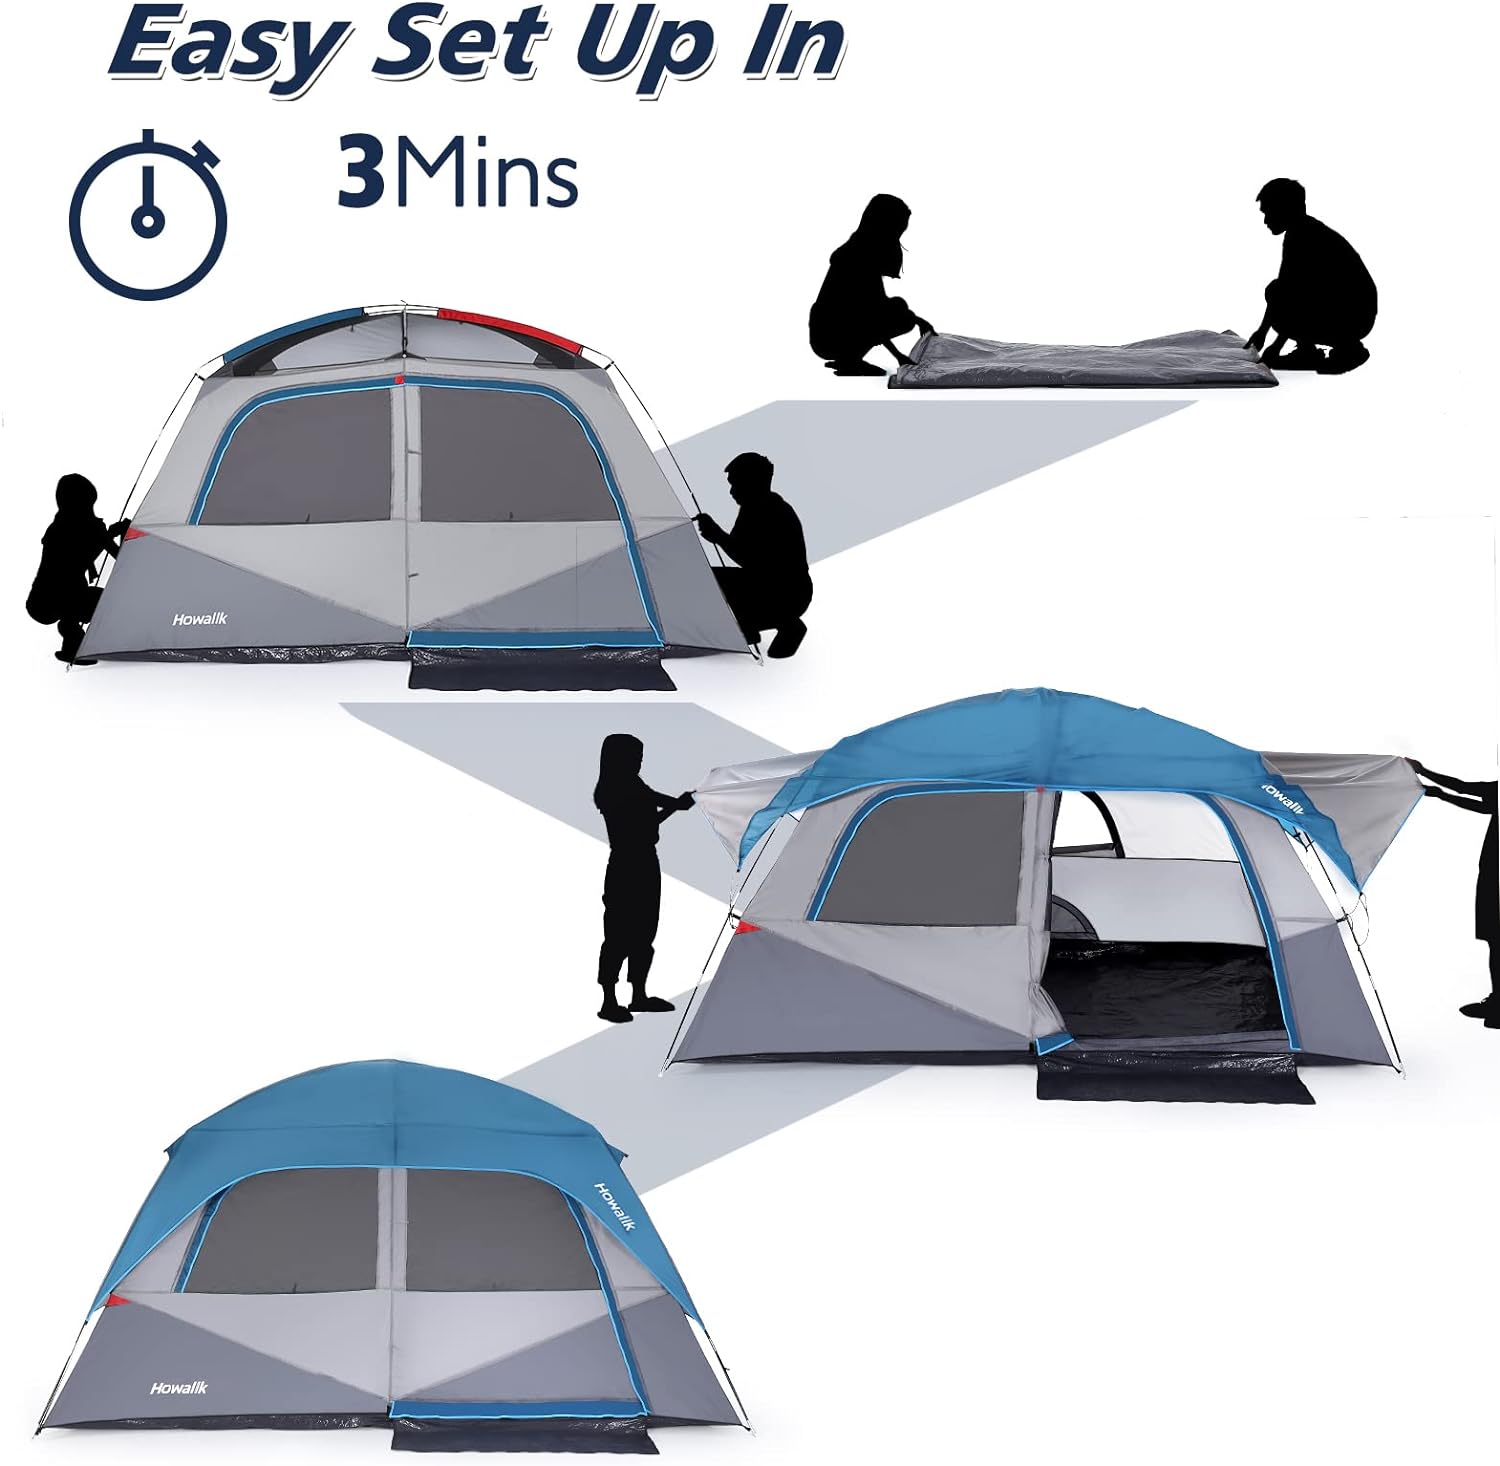 Camping Tent, Tent for Camping, Easy Set up Camping Tent 4 Person and 6 Person for Hiking Backpacking Traveling Outdoor (6 Person Instant), Light Blue